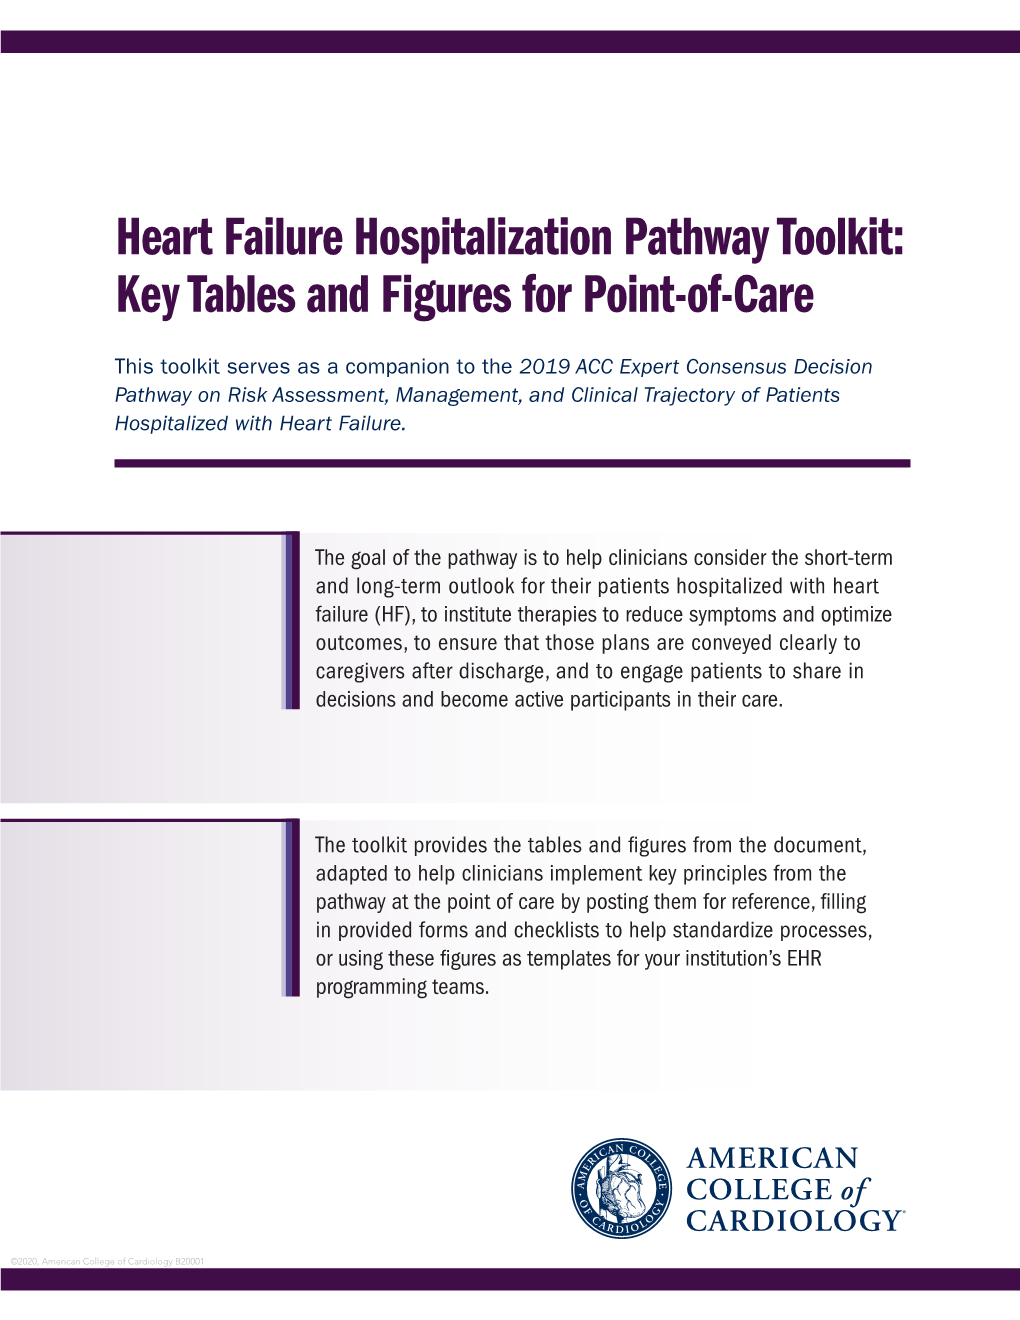 Heart Failure Hospitalization Pathway Toolkit: Key Tables and Figures for Point-Of-Care